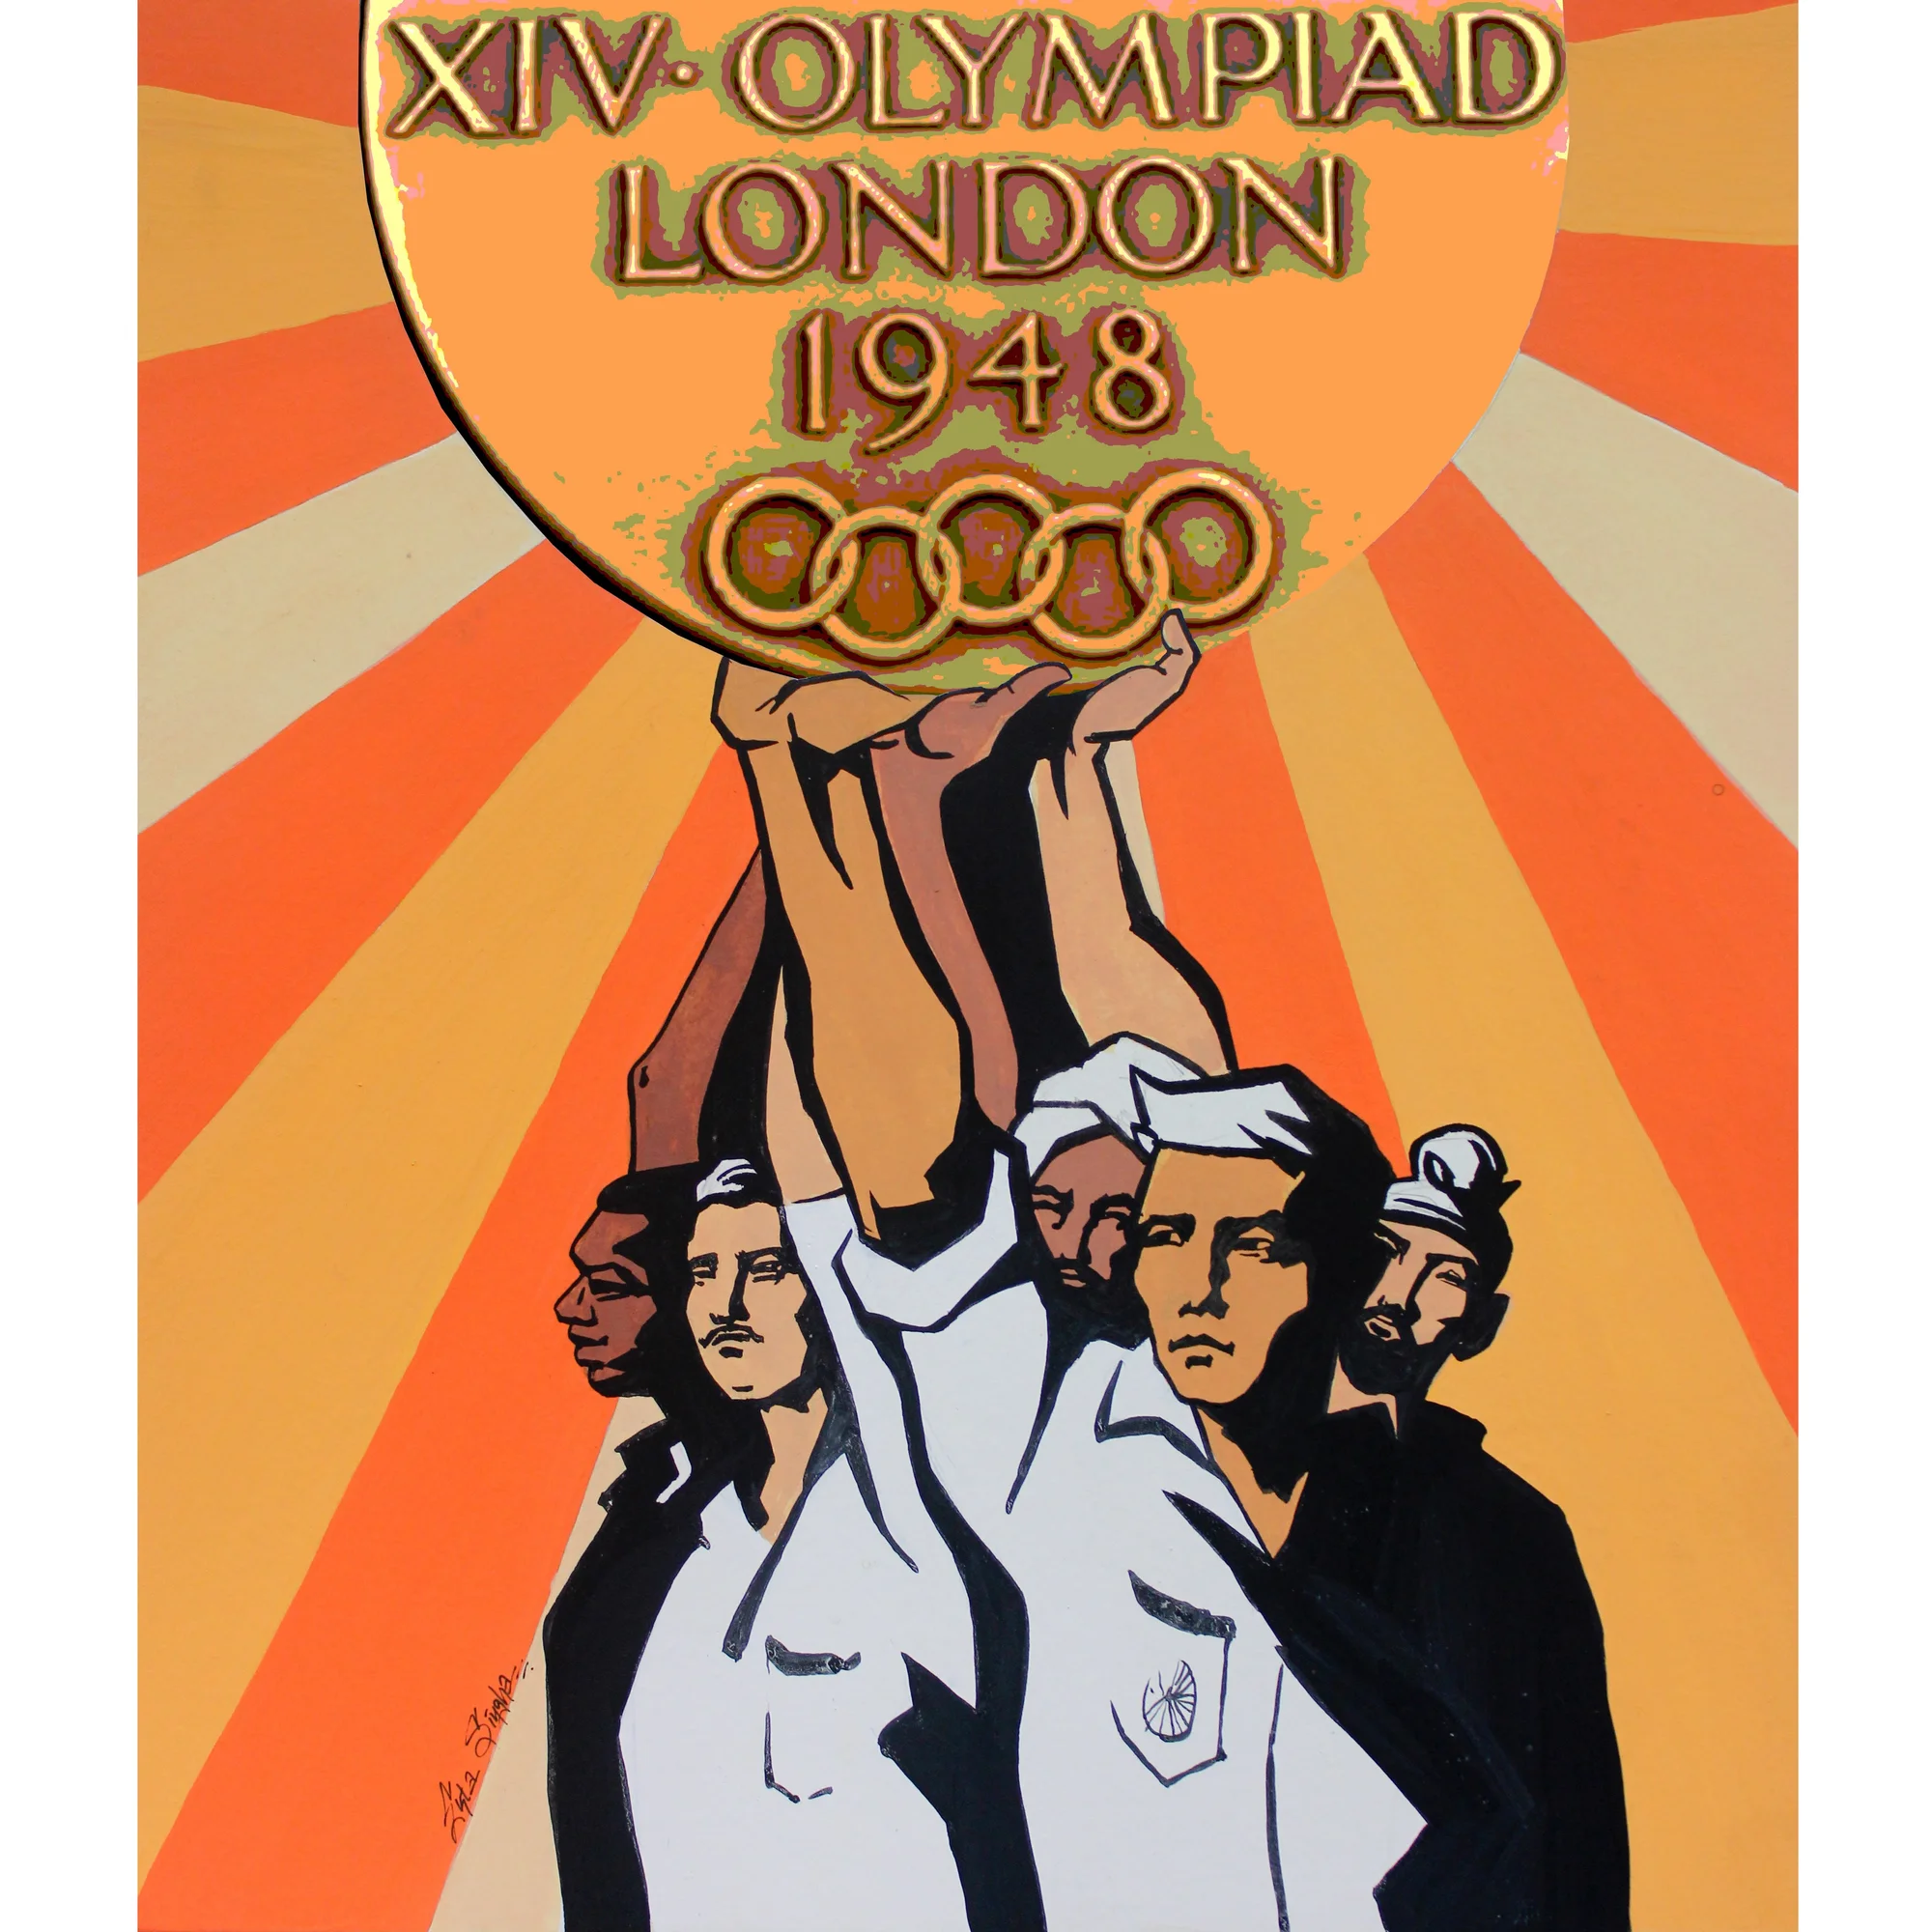 Illustration of a group of 5 people with their hands up, holding a large golden medal labeled “XIV OLYMPIAD LONDON 1948”, against an orange and yellow striped background.